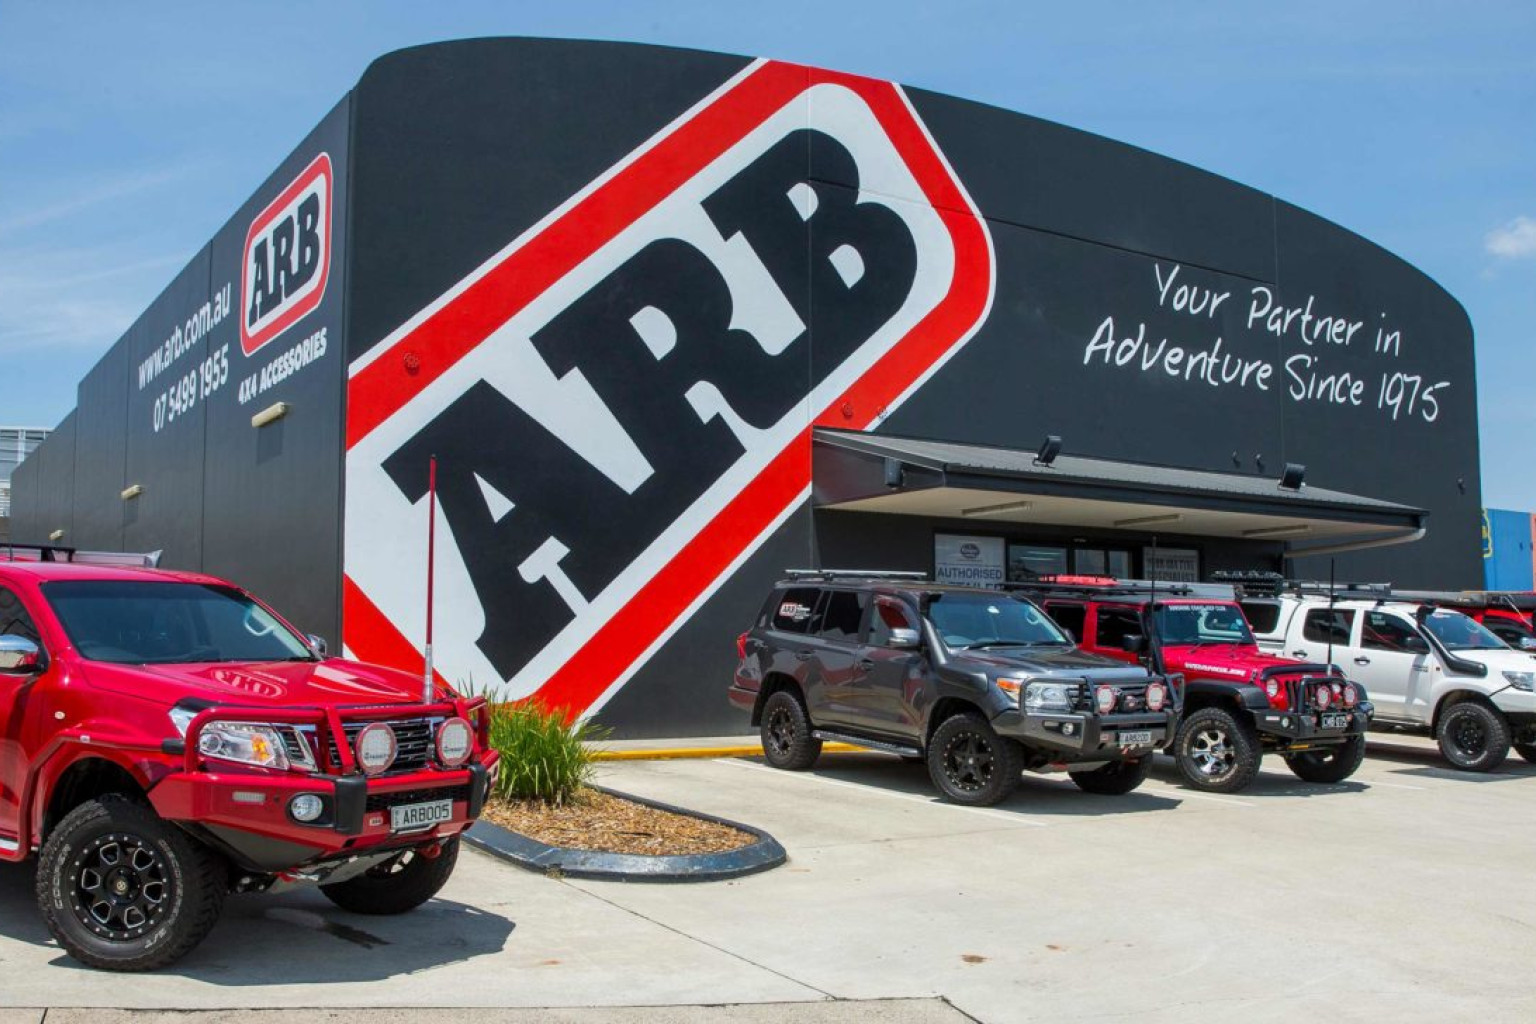 ARB Accessories Caboolture host open day - feature photo